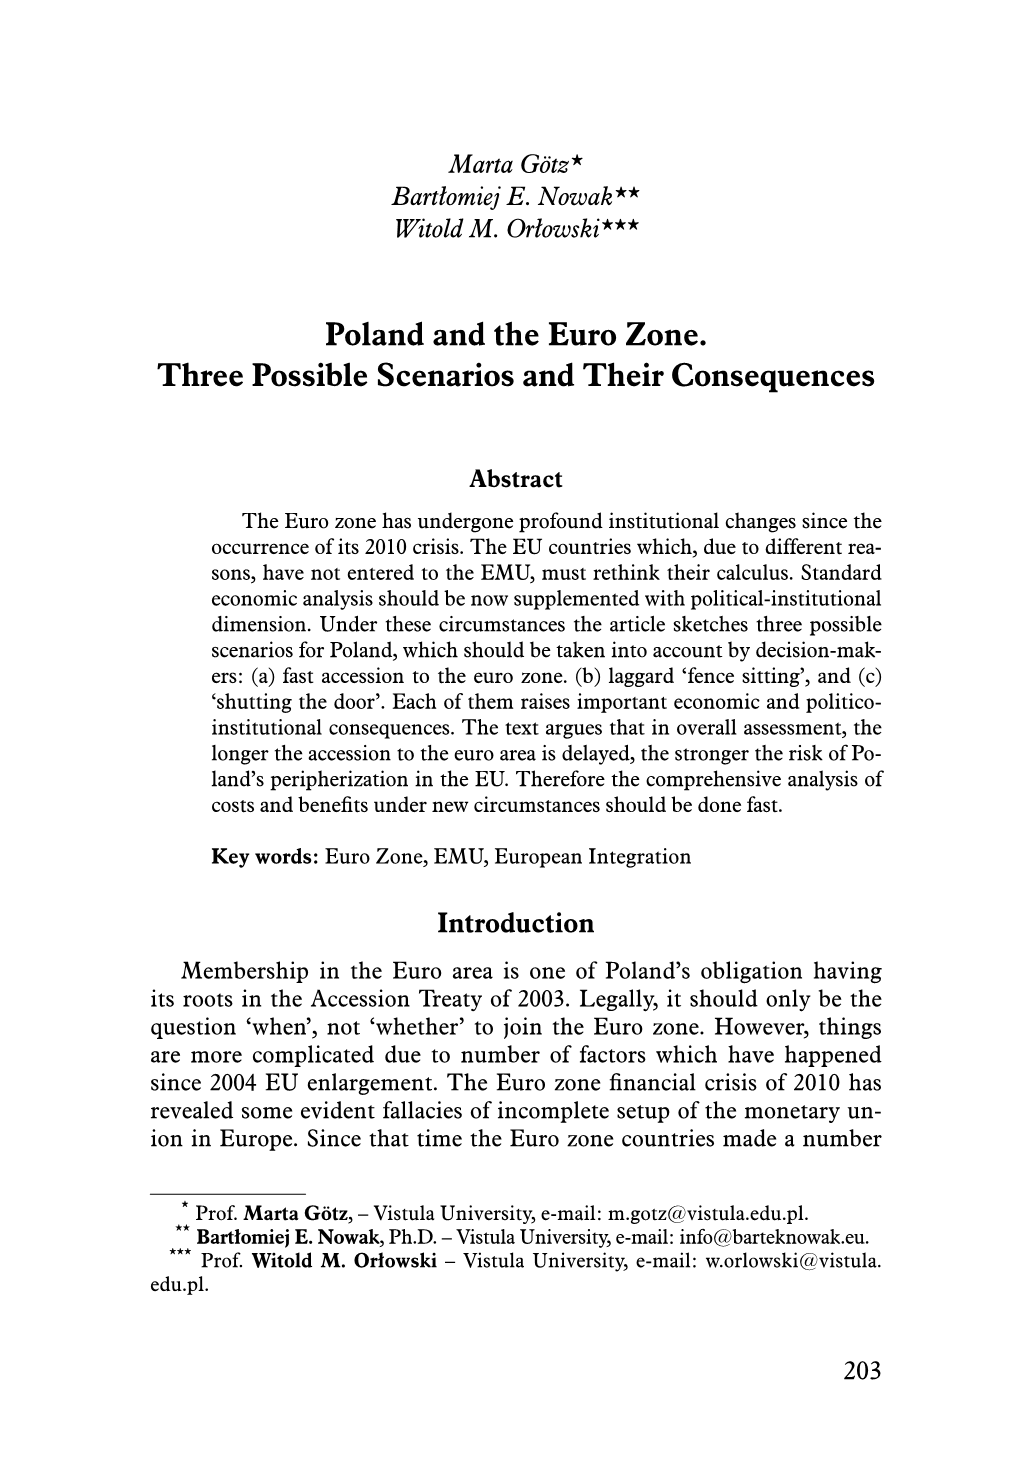 Poland and the Euro Zone. Three Possible Scenarios and Their Consequences